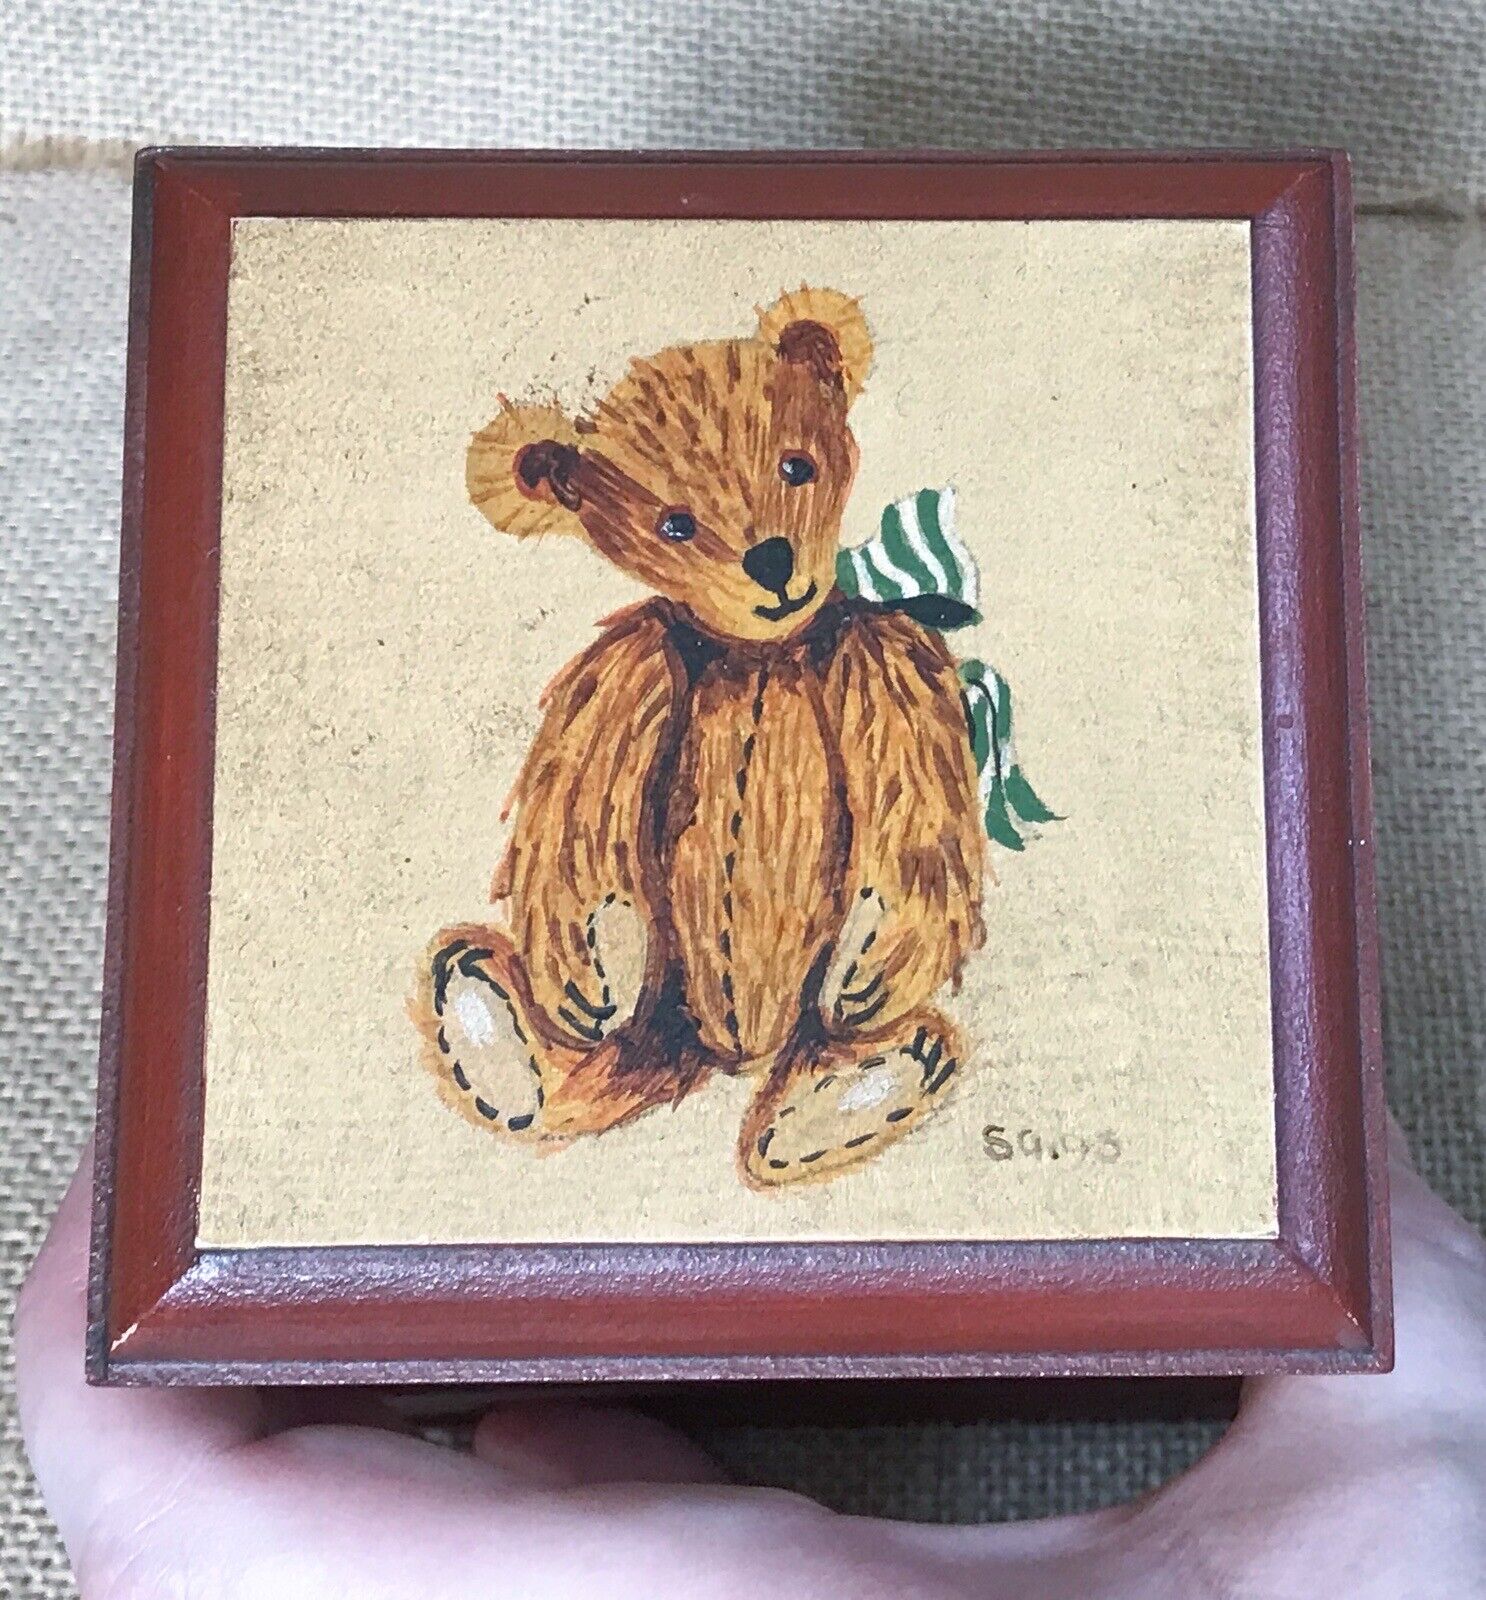 Vintage Rustic Hand Crafted Painted Teddy Bear Small Wood Trinket Jewelry Box